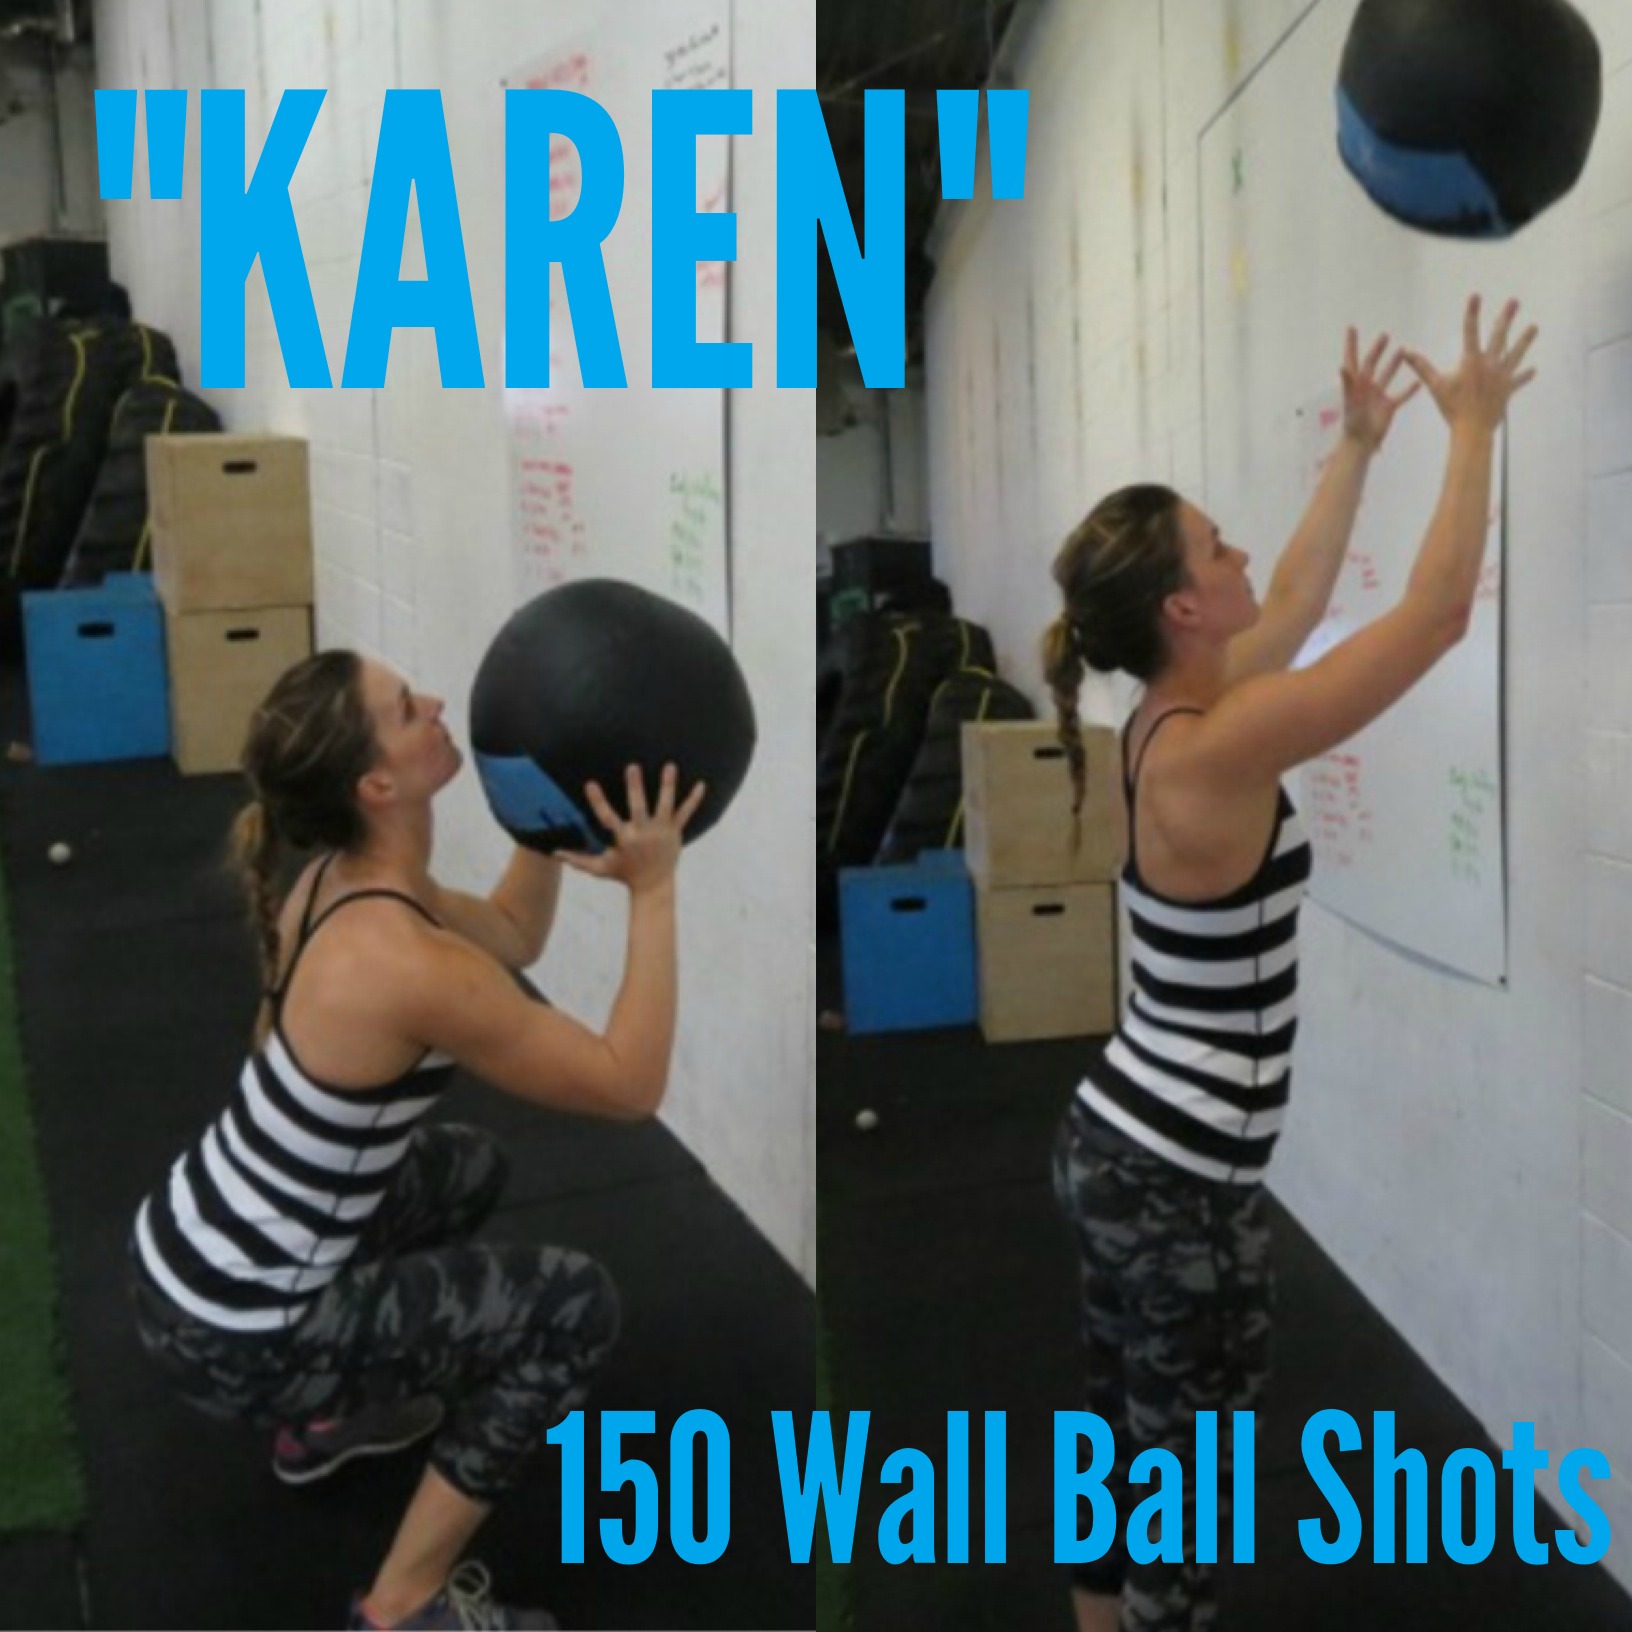 A CrossFitter doing the WOD "Karen" which is 150 Wall Ball Shots